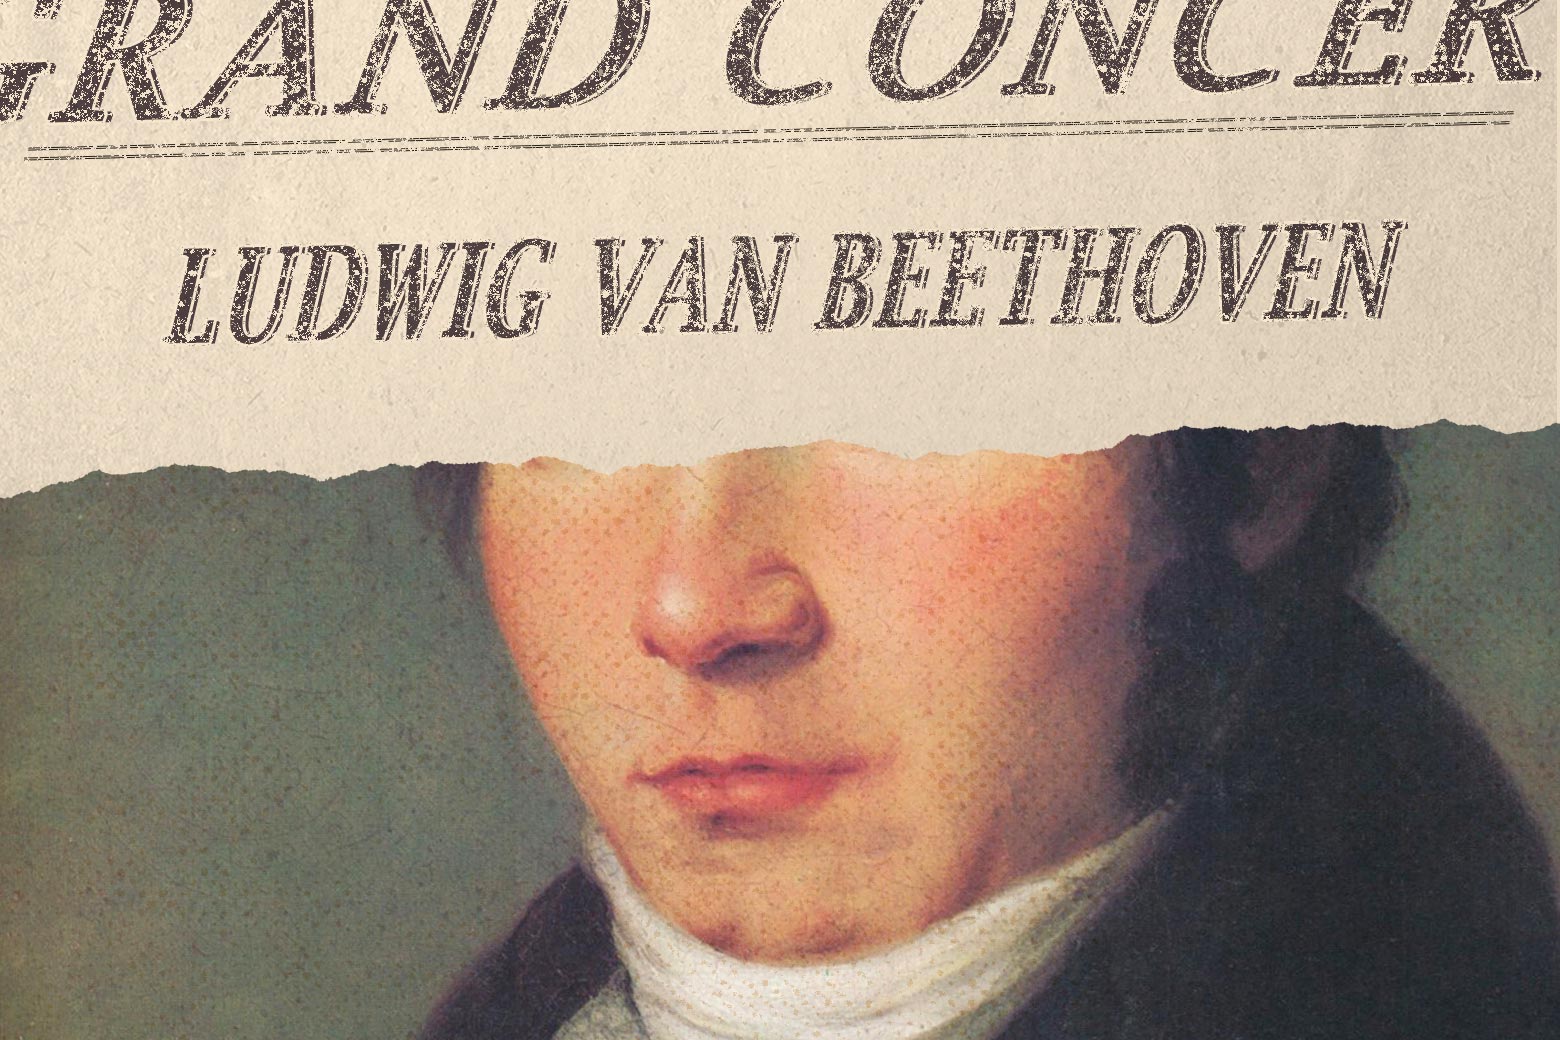 A portion of a program for a Ludwig van Beethoven is seen imposed over the top half of his face.